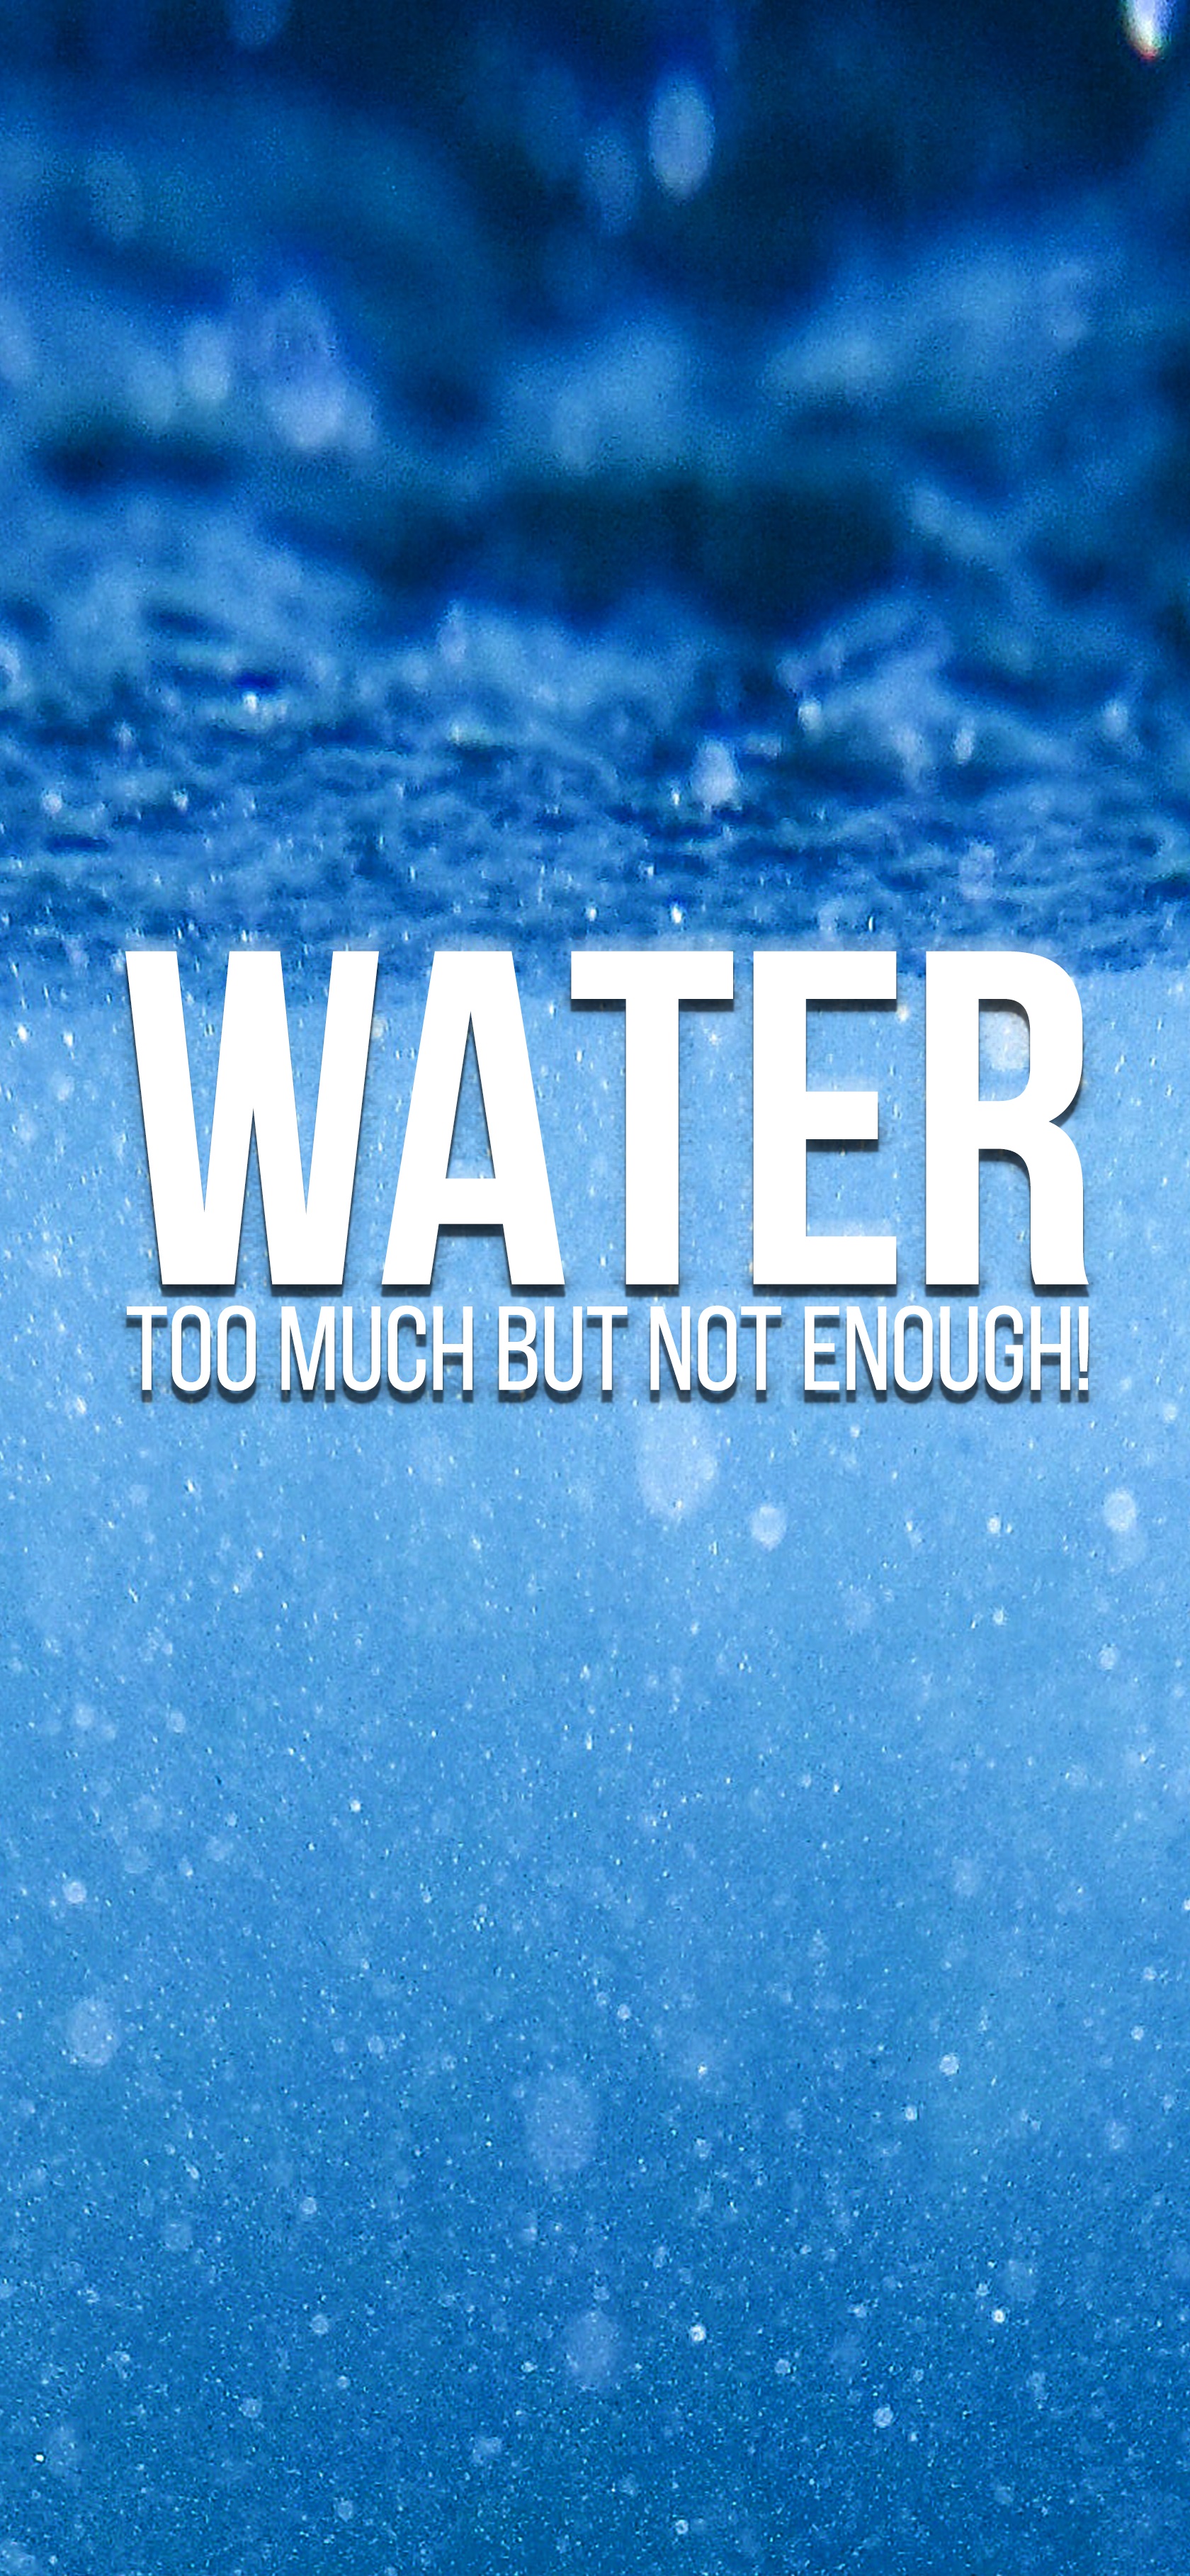 Water: We Have Too Much, But Not Enough